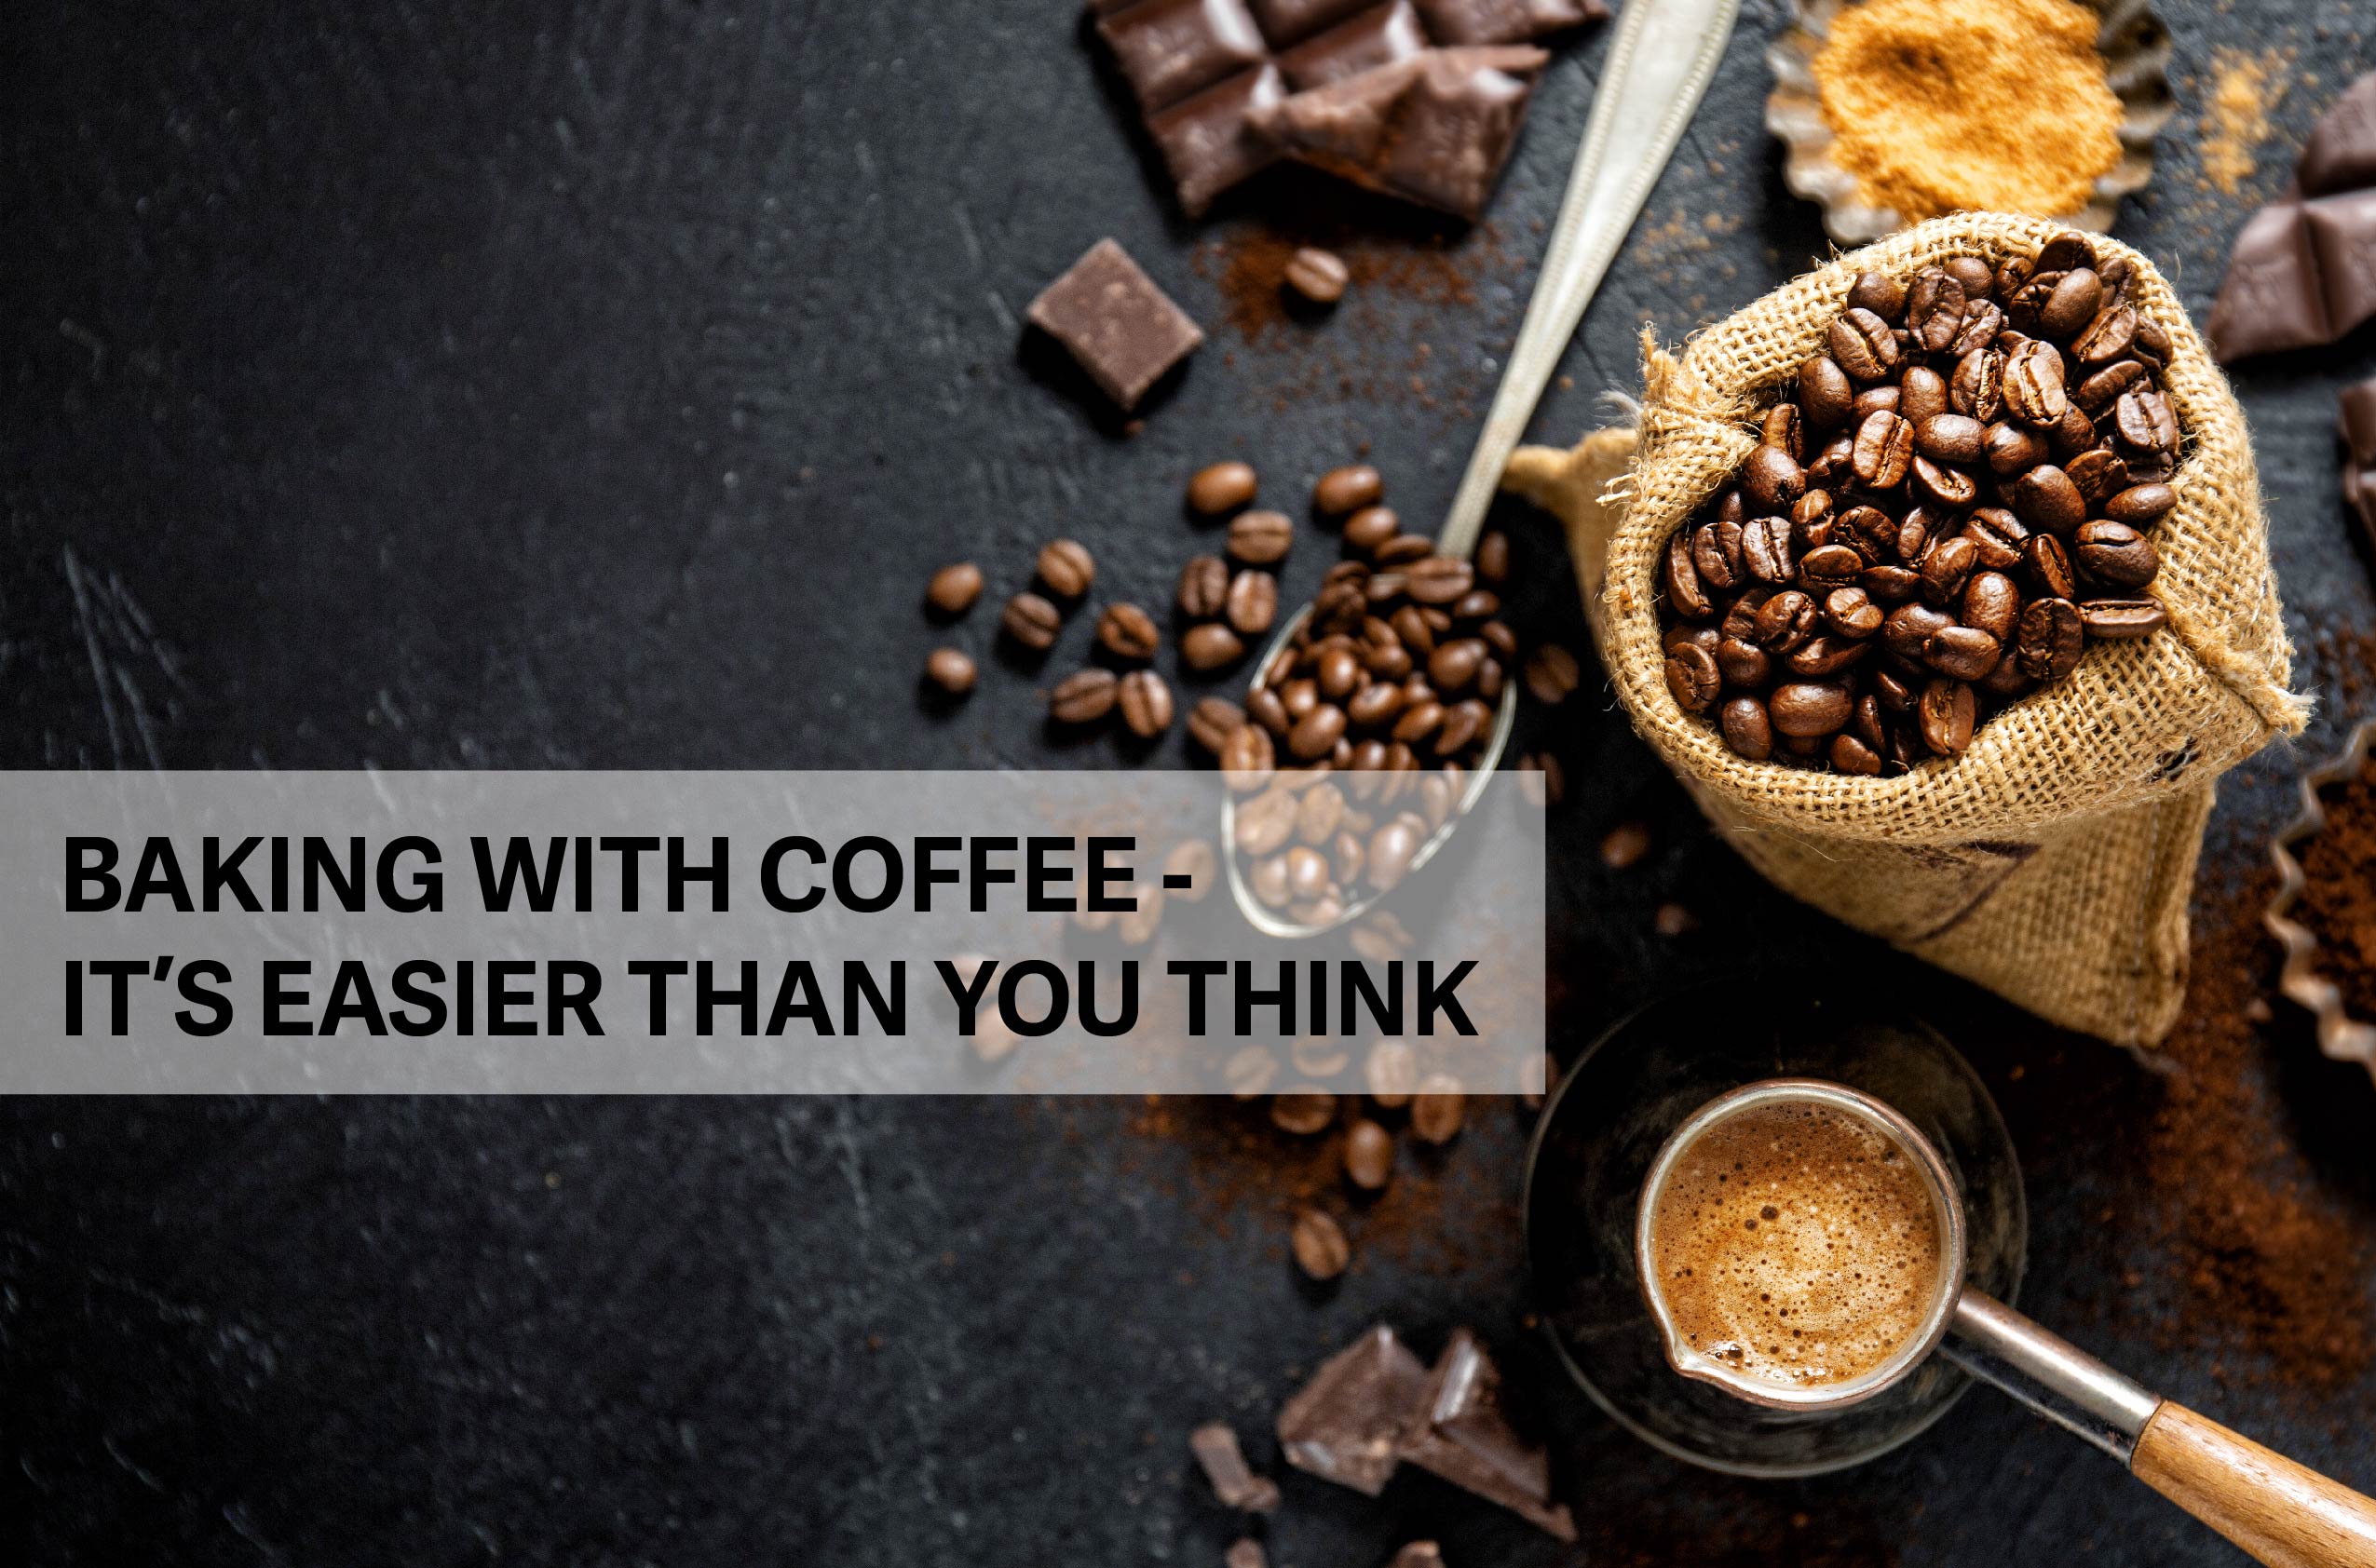 Baking with Coffee - It's Easier Than You Think